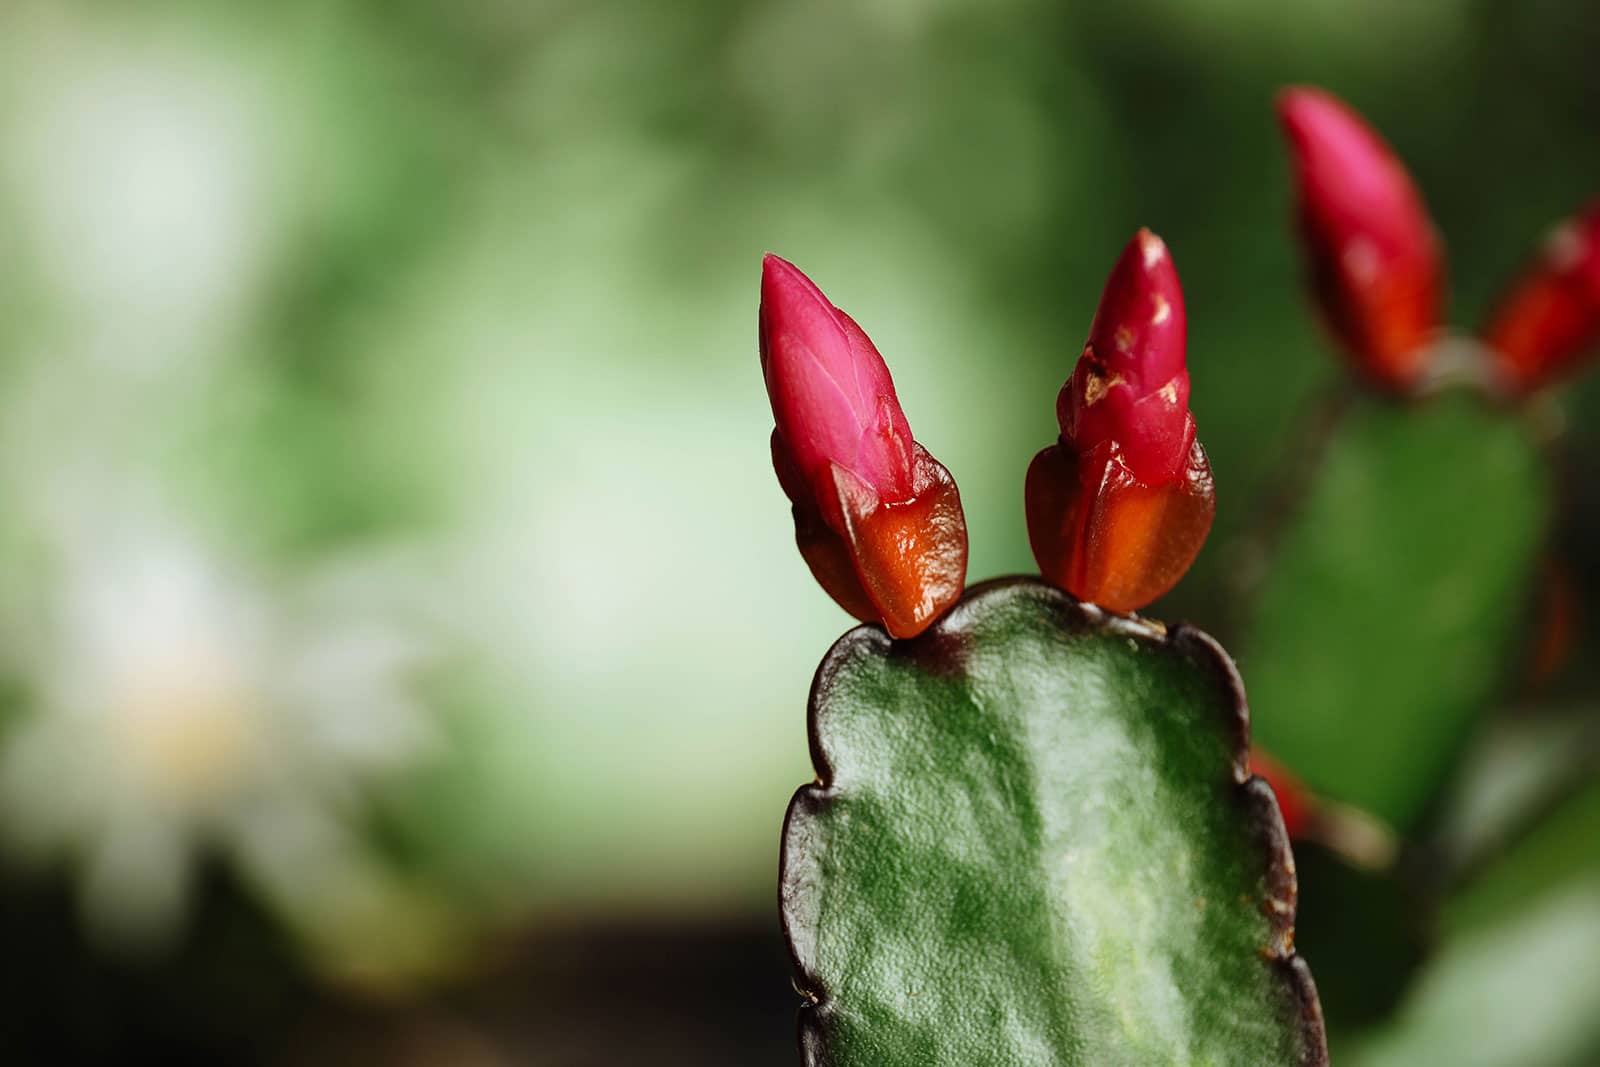 Close-up of Christmas cactus leaf segment with two red flower buds